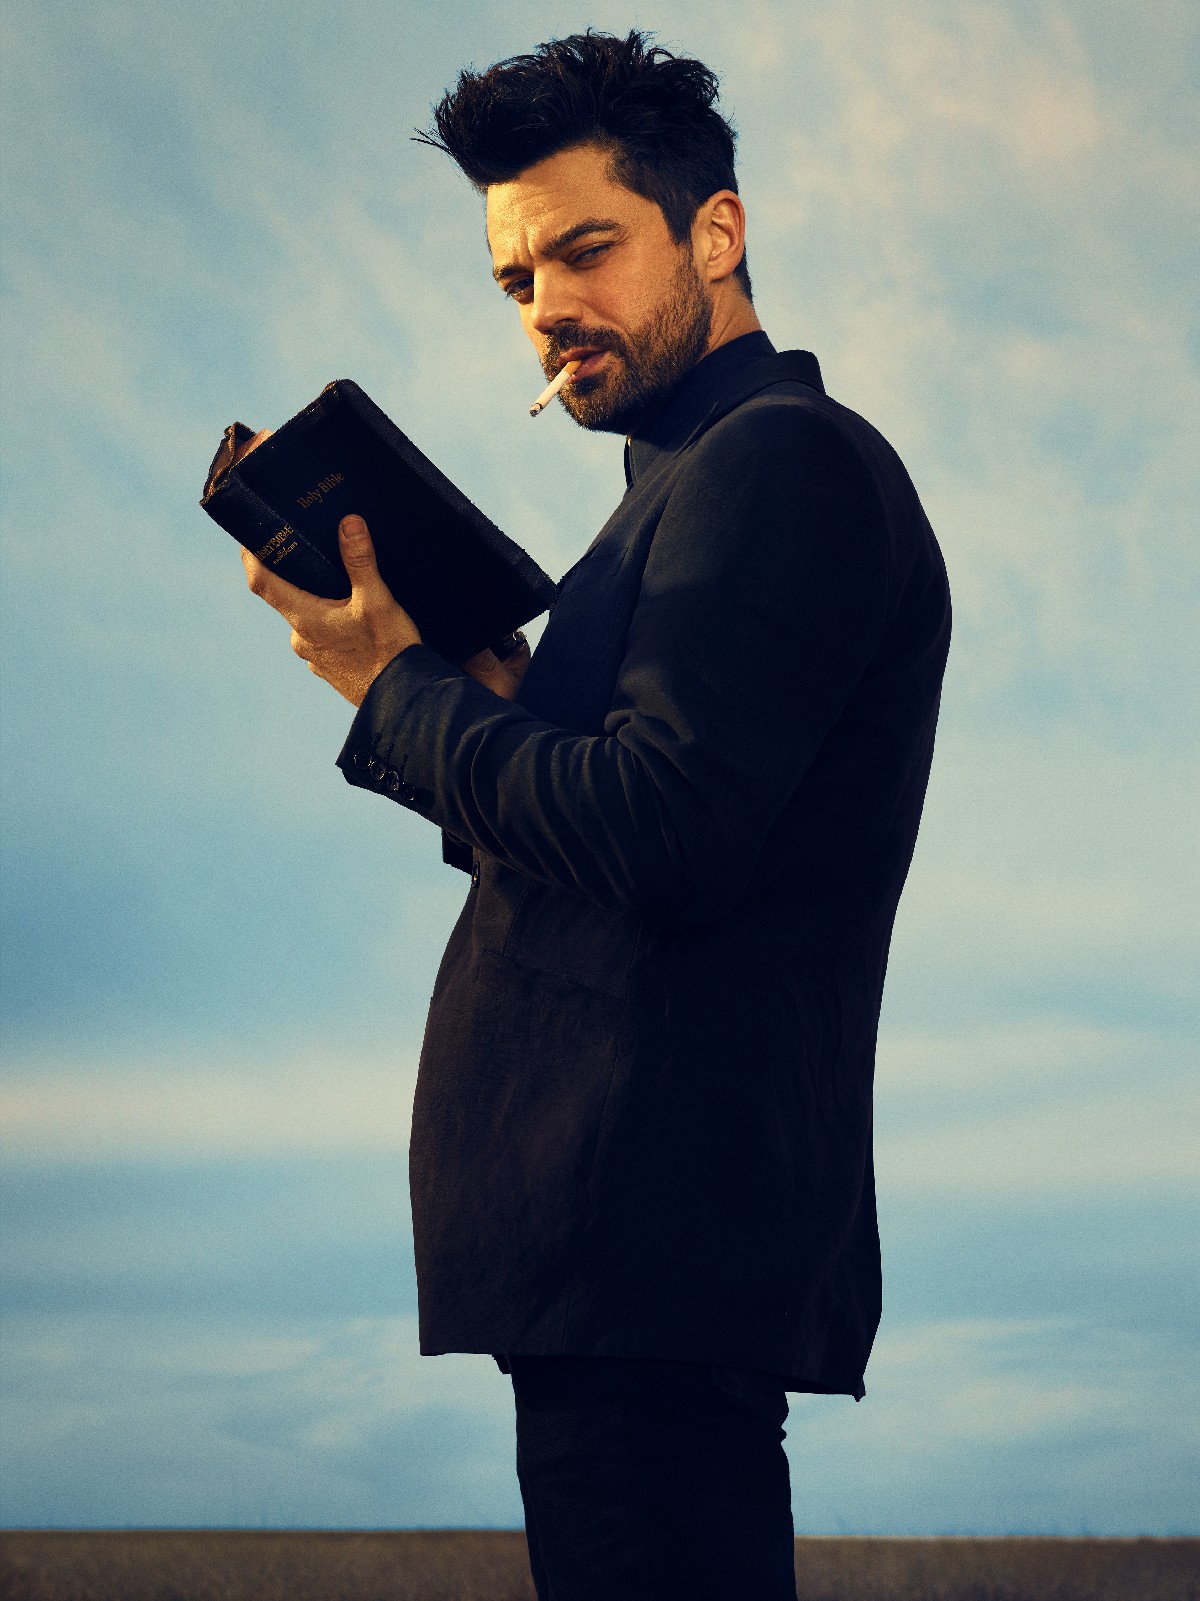 Amazing Preacher Pictures & Backgrounds